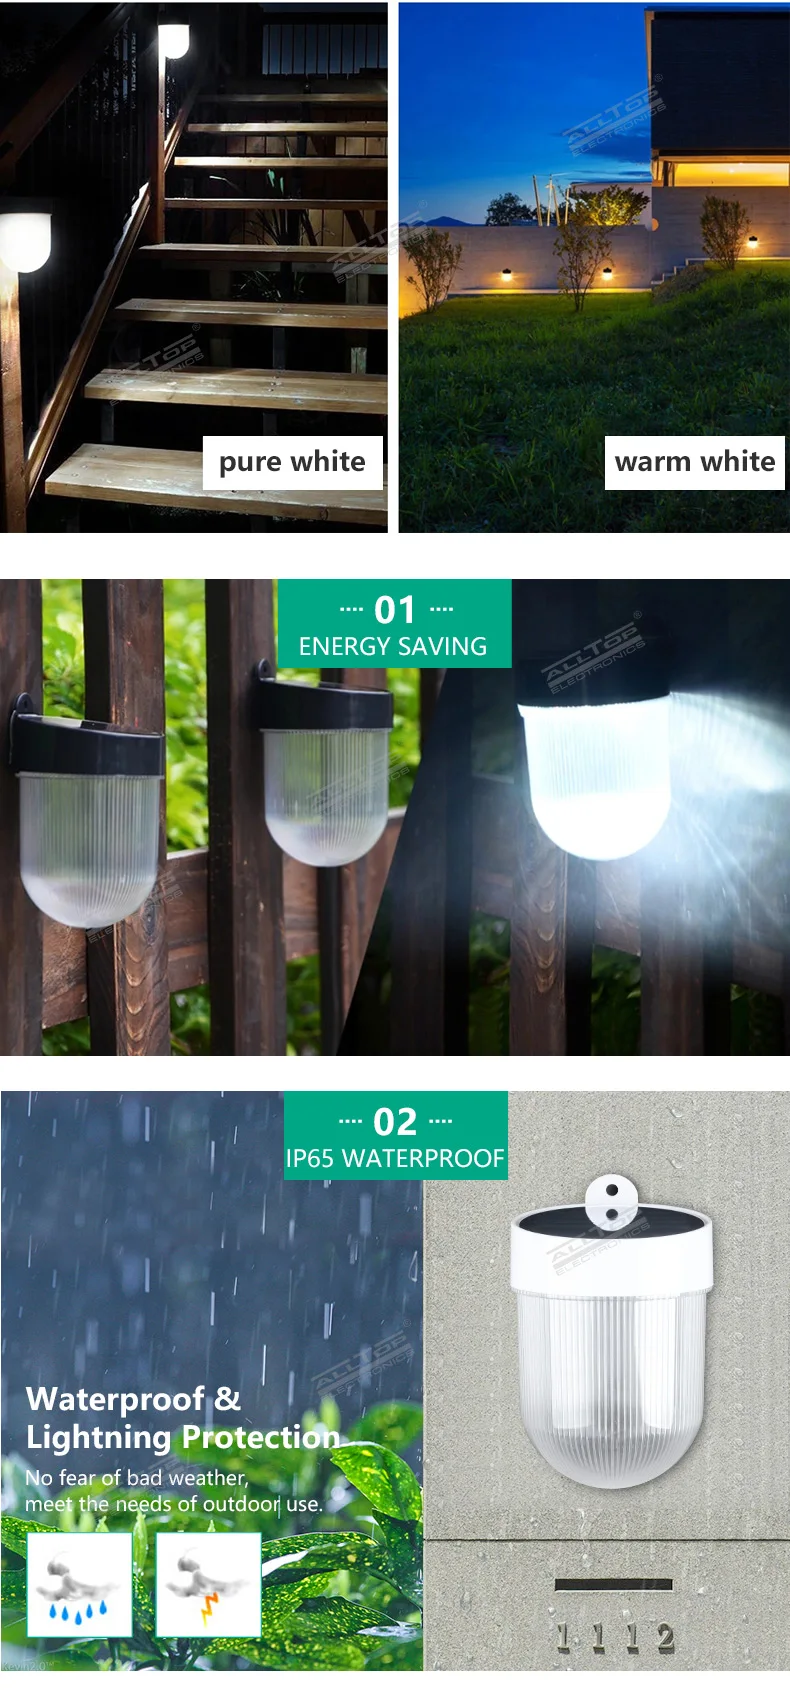 ALLTOP High quality 2v waterproof outdoor lighting 3w led solar wall lamp